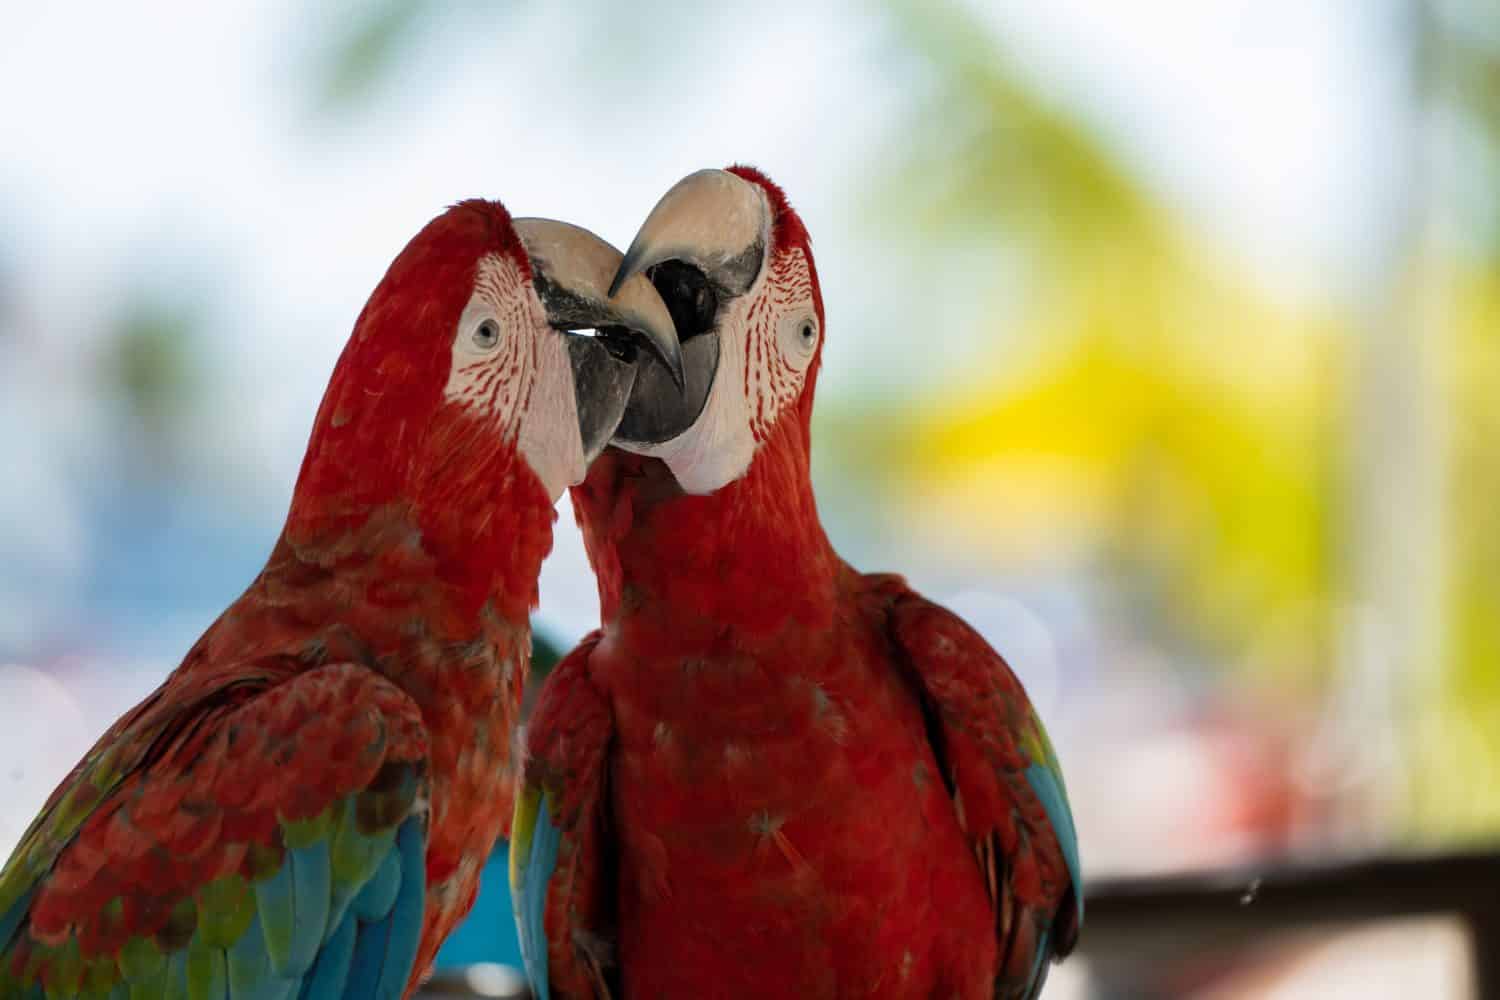 Pair of colorful Macaws parrots, Ara parrots ,Scarlet Macaw two birds perched on on the branch with blurred background